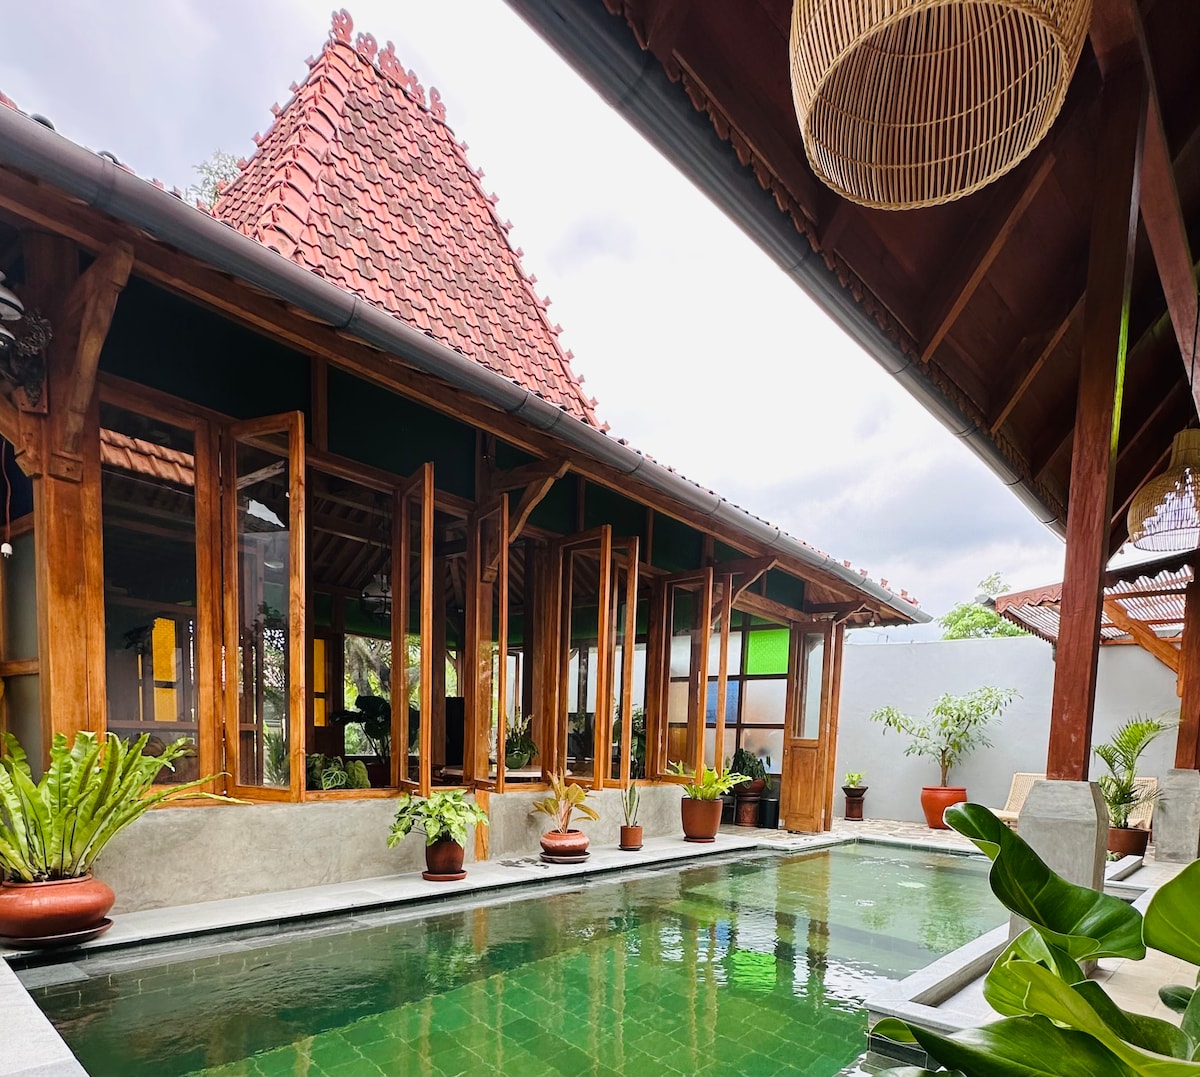 Omah Jago luxury homestay with private pool